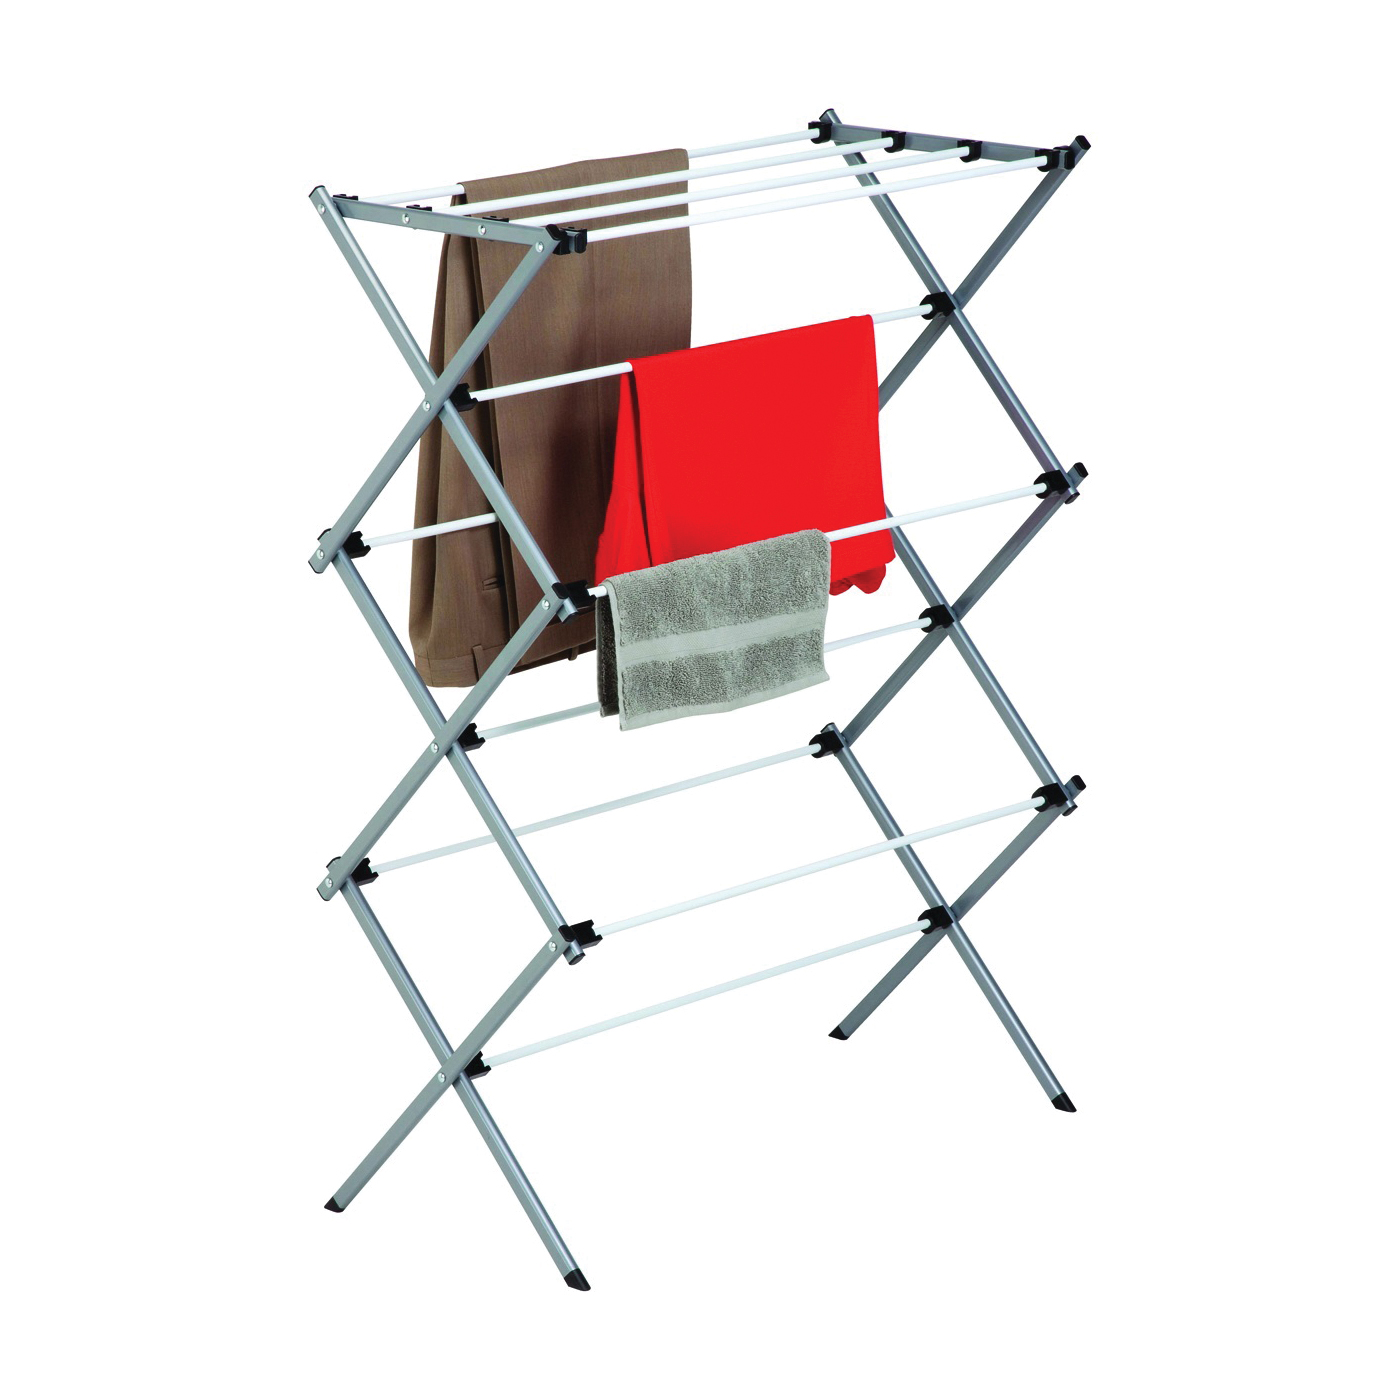 DRY-01306 Collapsible Cloth Drying Rack, Steel, Silver, 15 in W, 42 in H, 30 in L